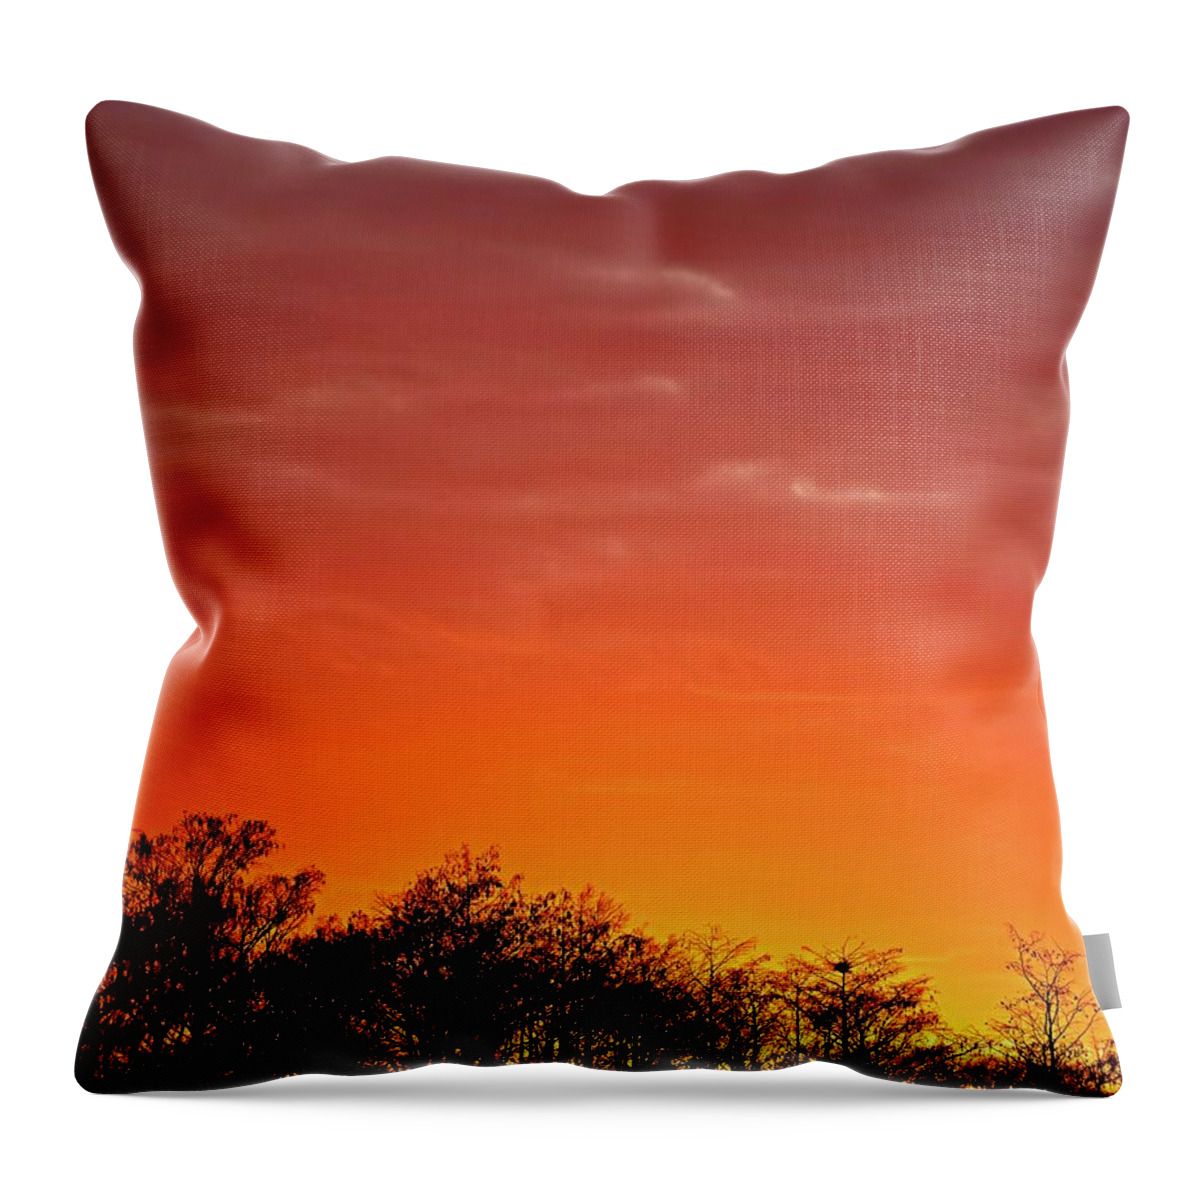 Swamp Throw Pillow featuring the photograph Cypress Swamp Sunset 4 by Steve DaPonte